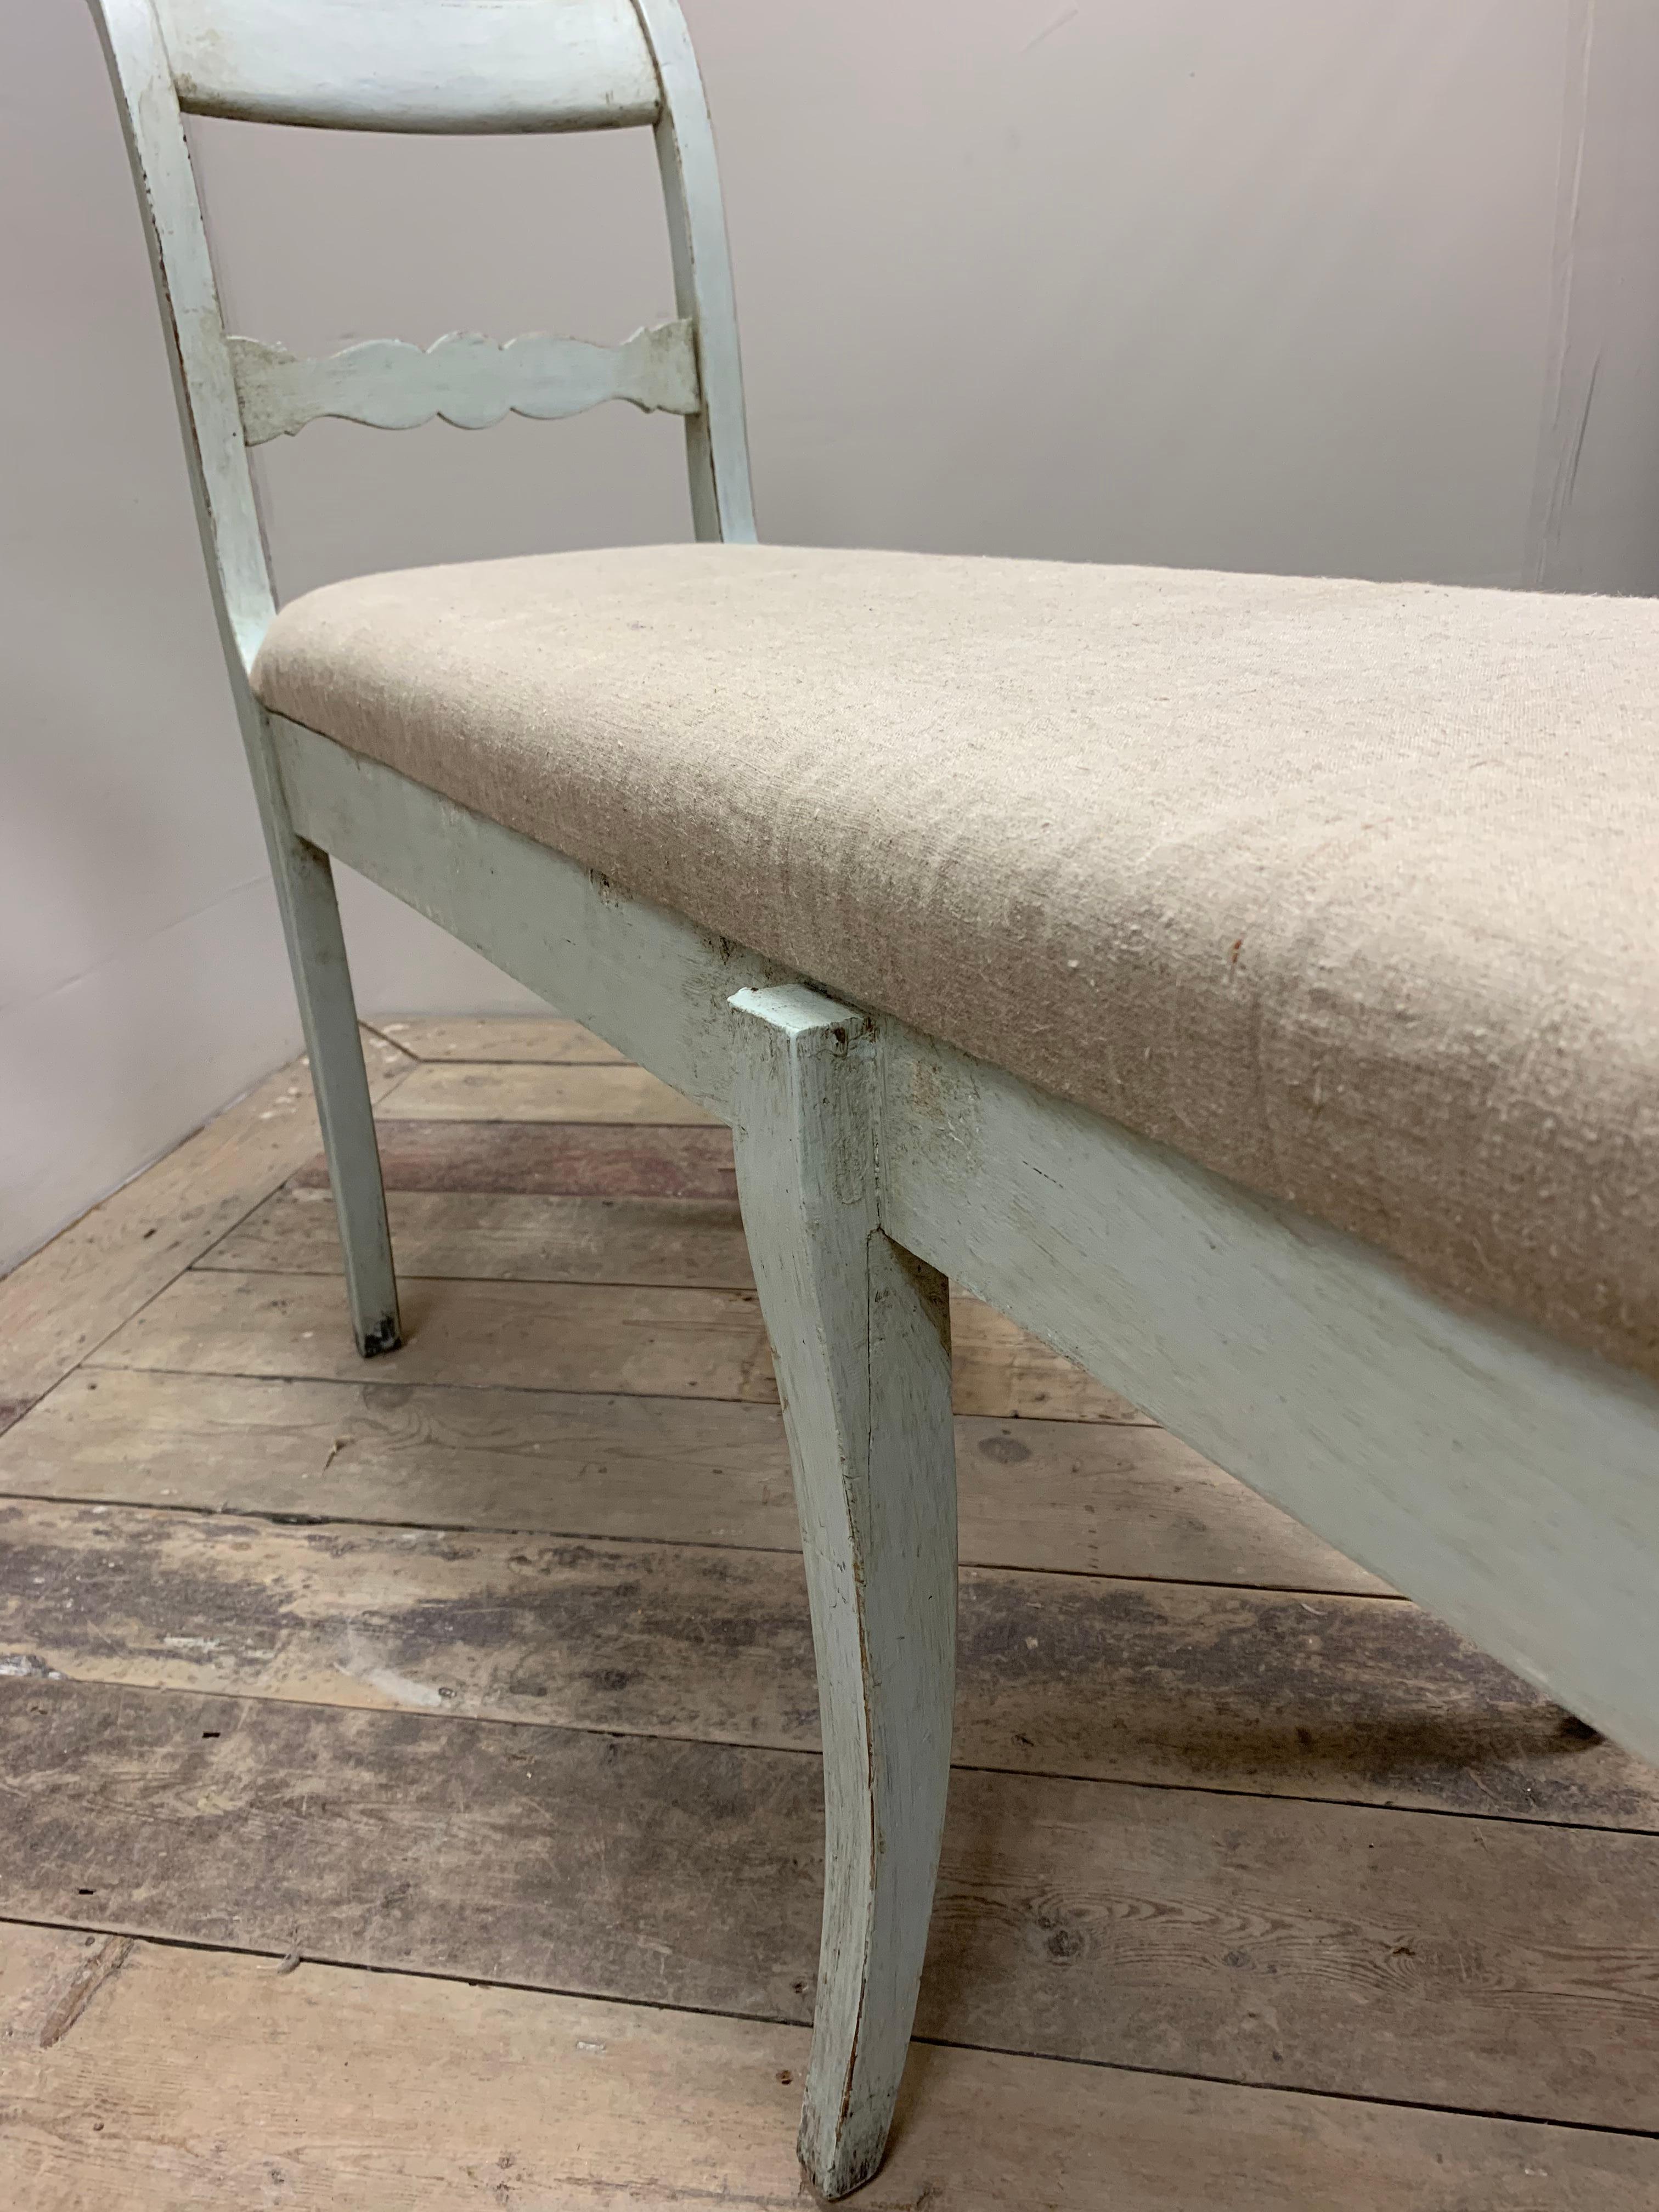 Circa 1900 Painted Pale Green/Blue Swedish Bench with an Upholstered Seat 2